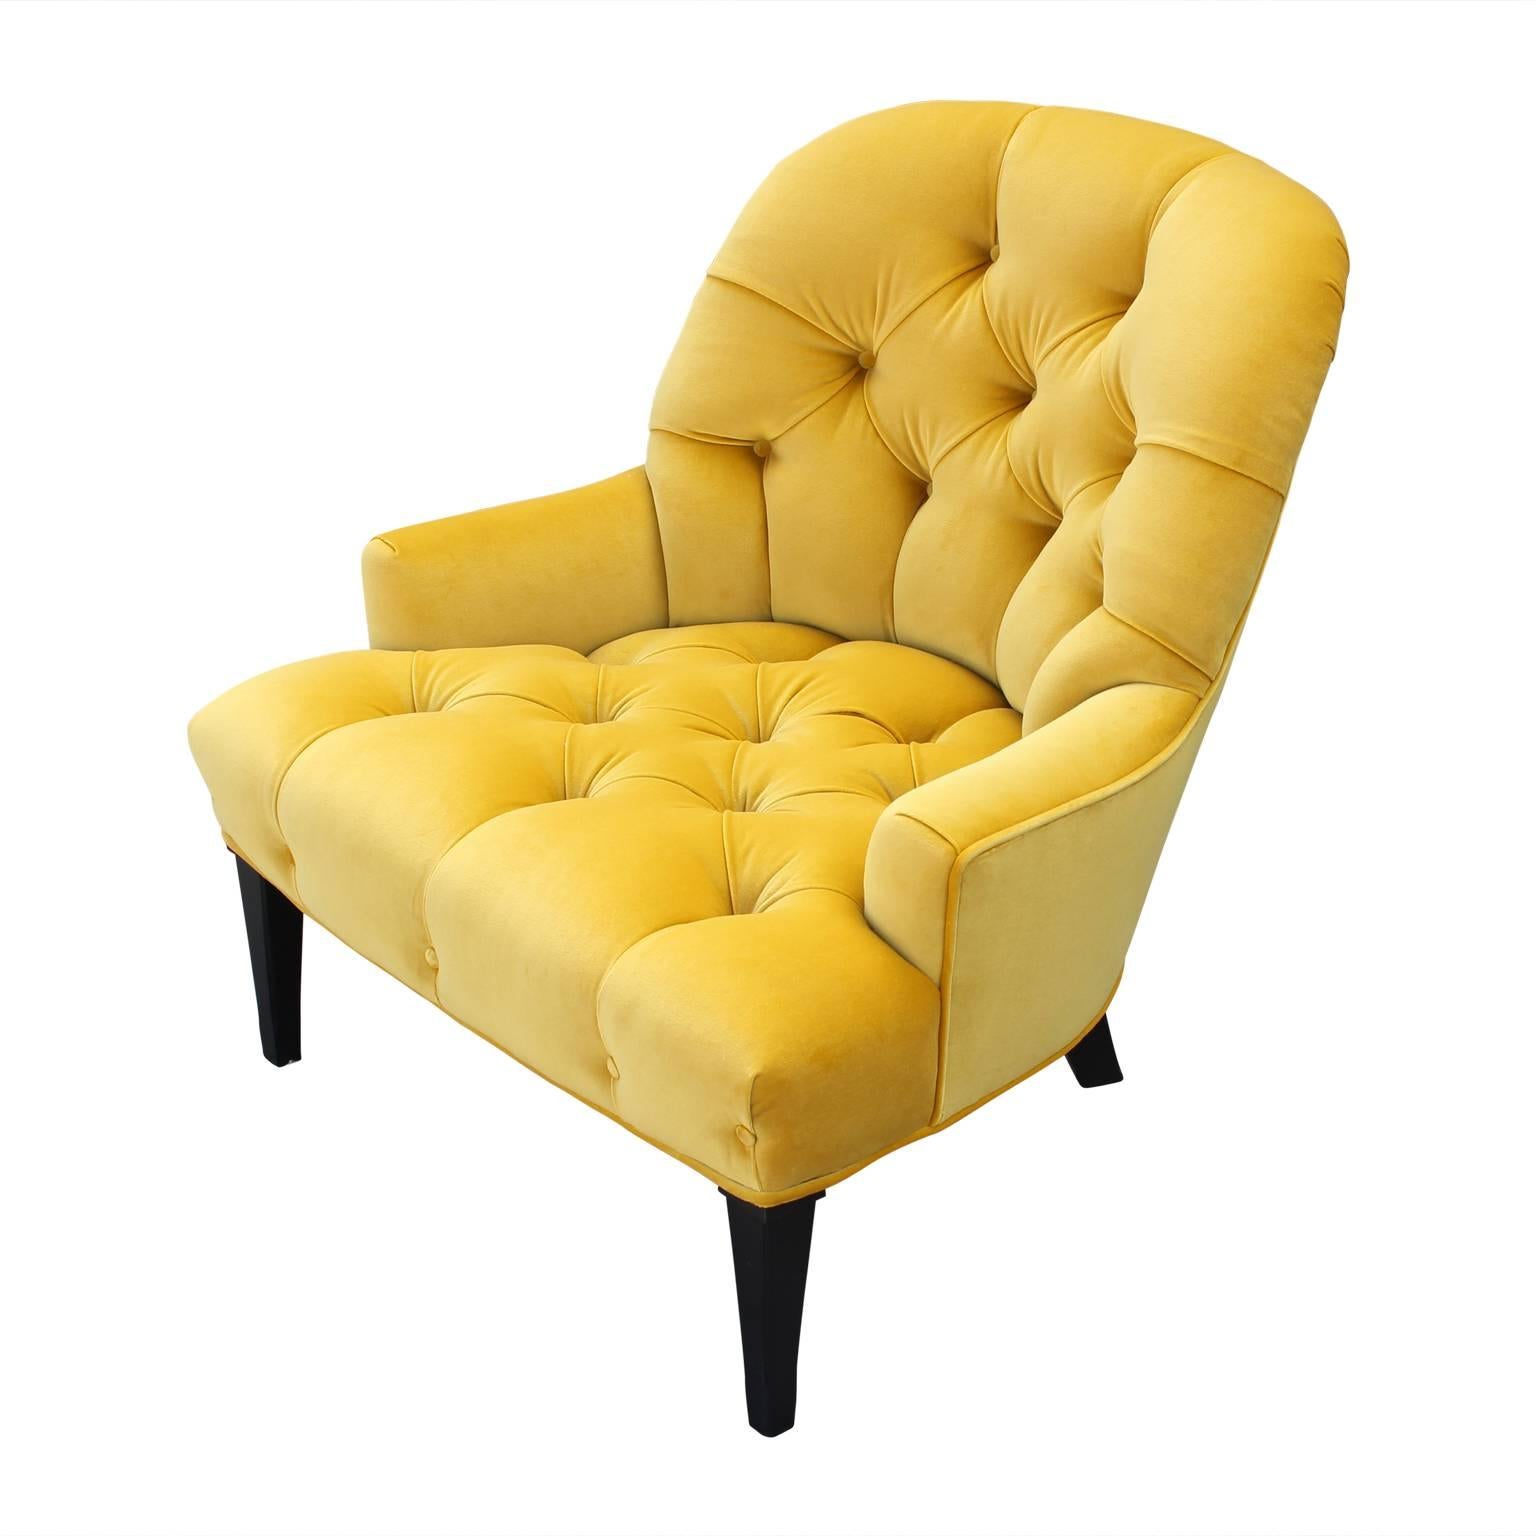 yellow tufted chair